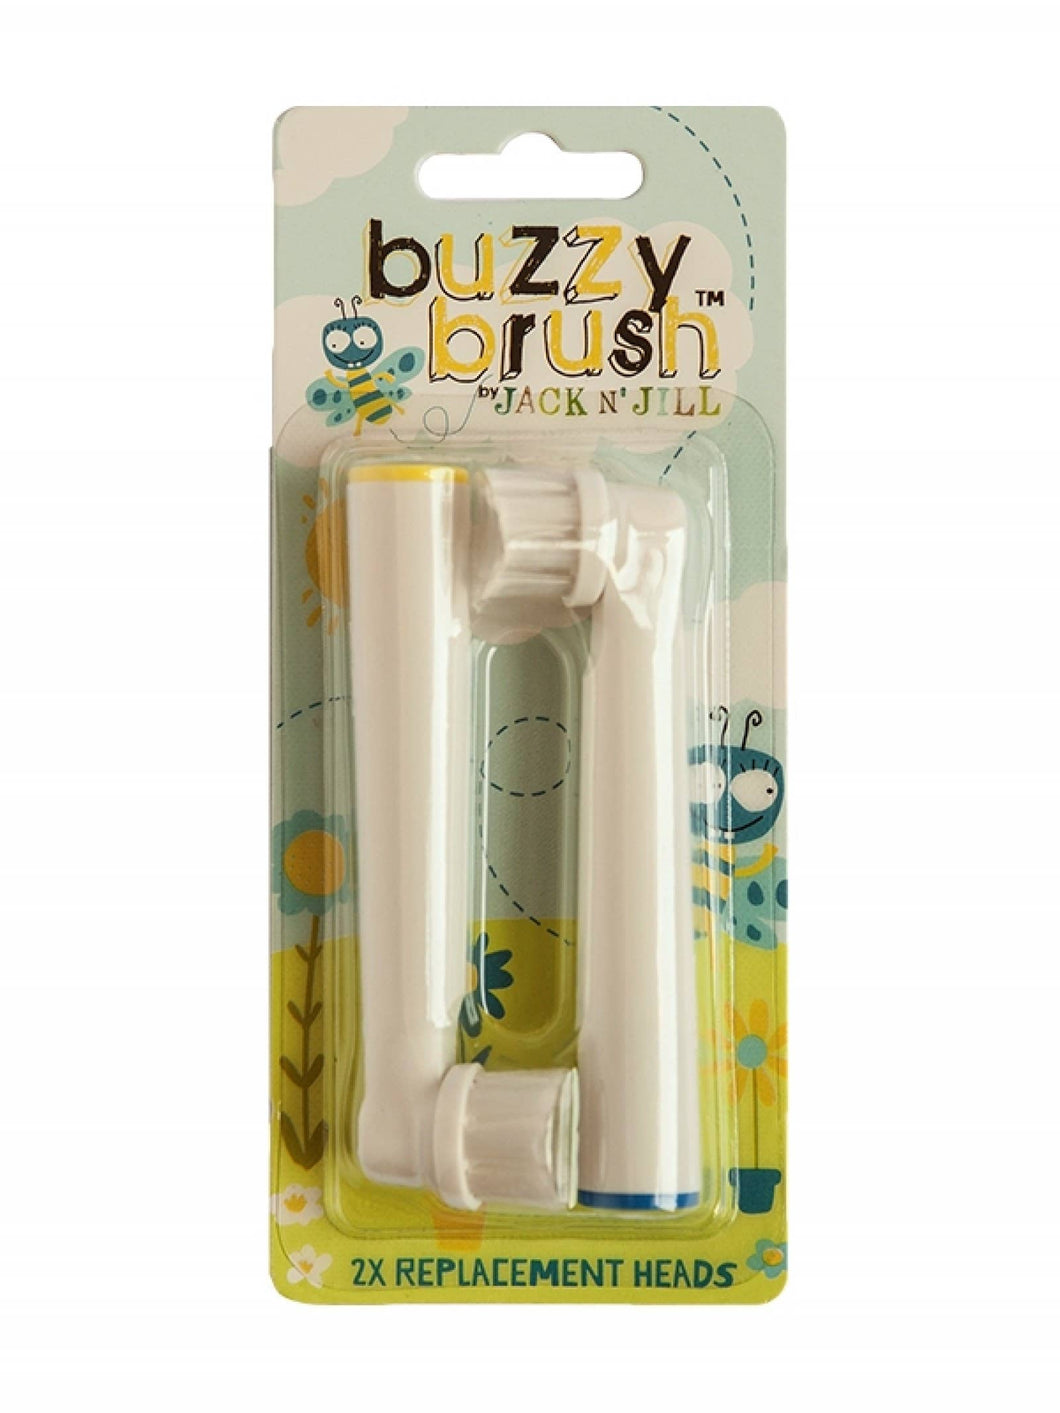 Buzzy Brush Replacement Heads - 2 Pack